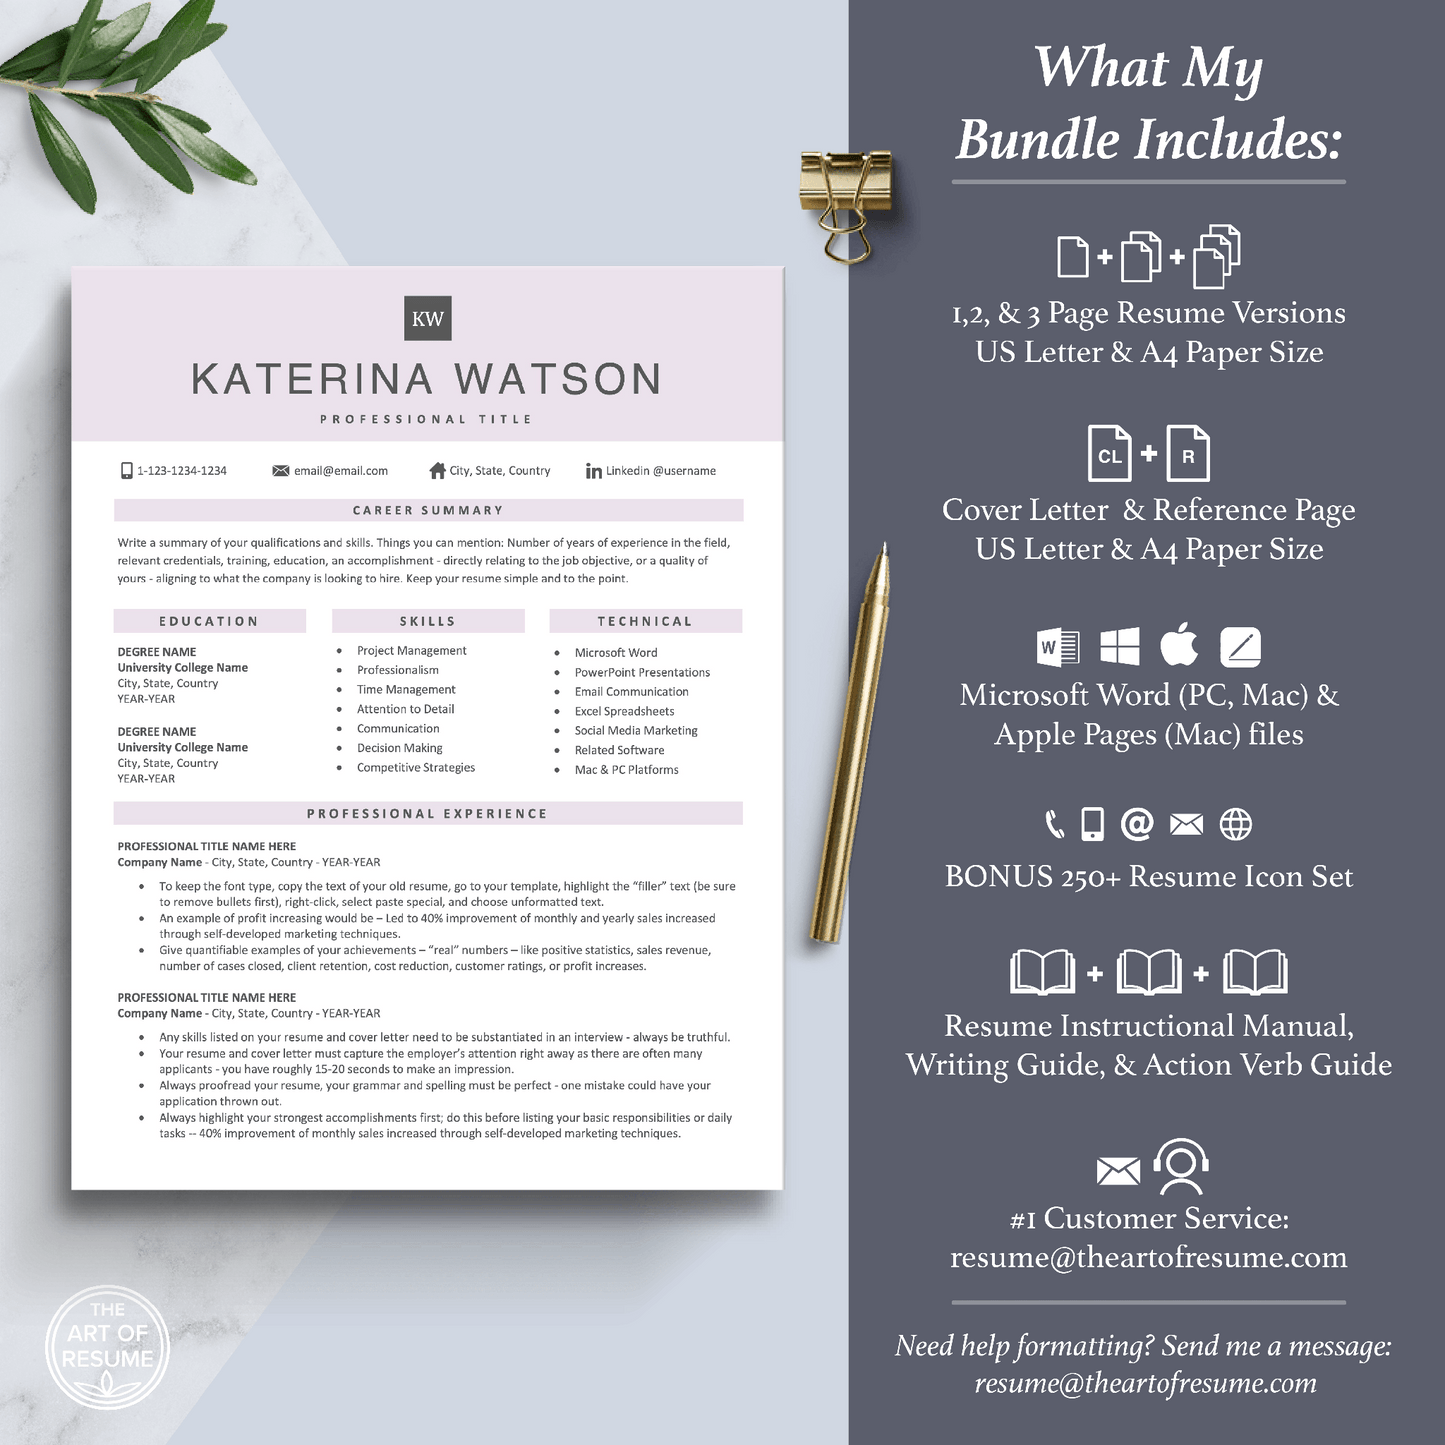 The Art of Resume Templates | Professional Rose Pink Resume CV Template Includes 3 Editable Resume Templates, Cover Letter, Reference Page, Mac, PC, A4 Paper, US size, Free Guide, The Art of Resume Writing, 250 Bonus Resume Icons